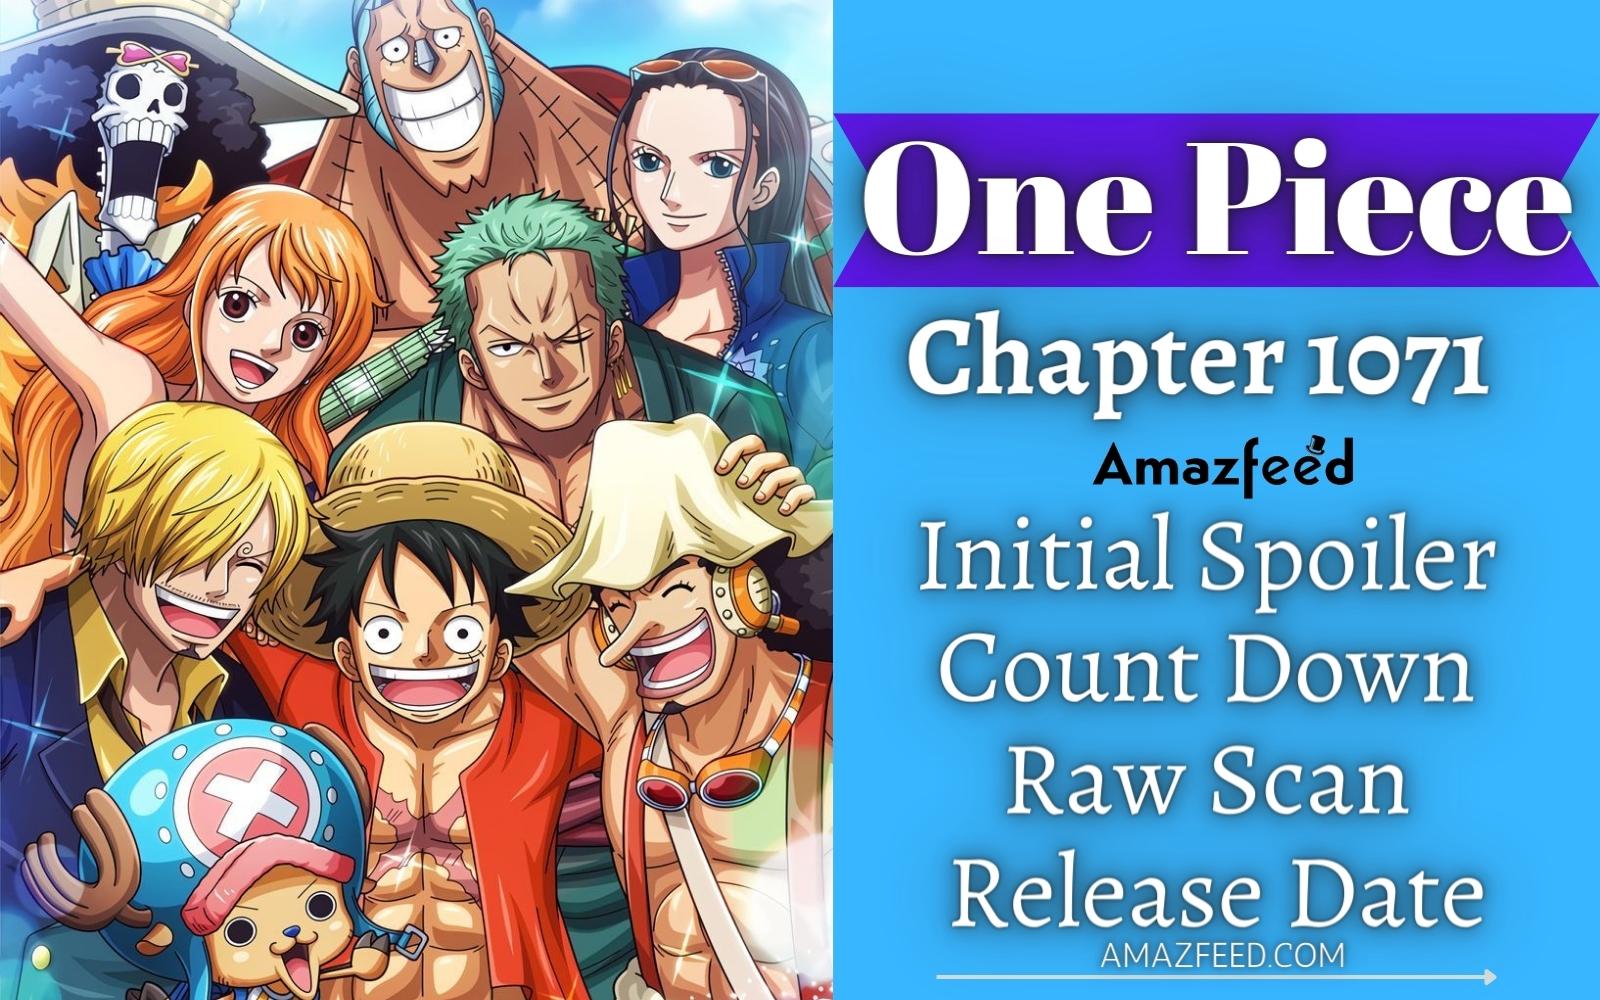 THE TRUTH COMES OUT (Full Summary) / One Piece Chapter 1071 Spoilers 